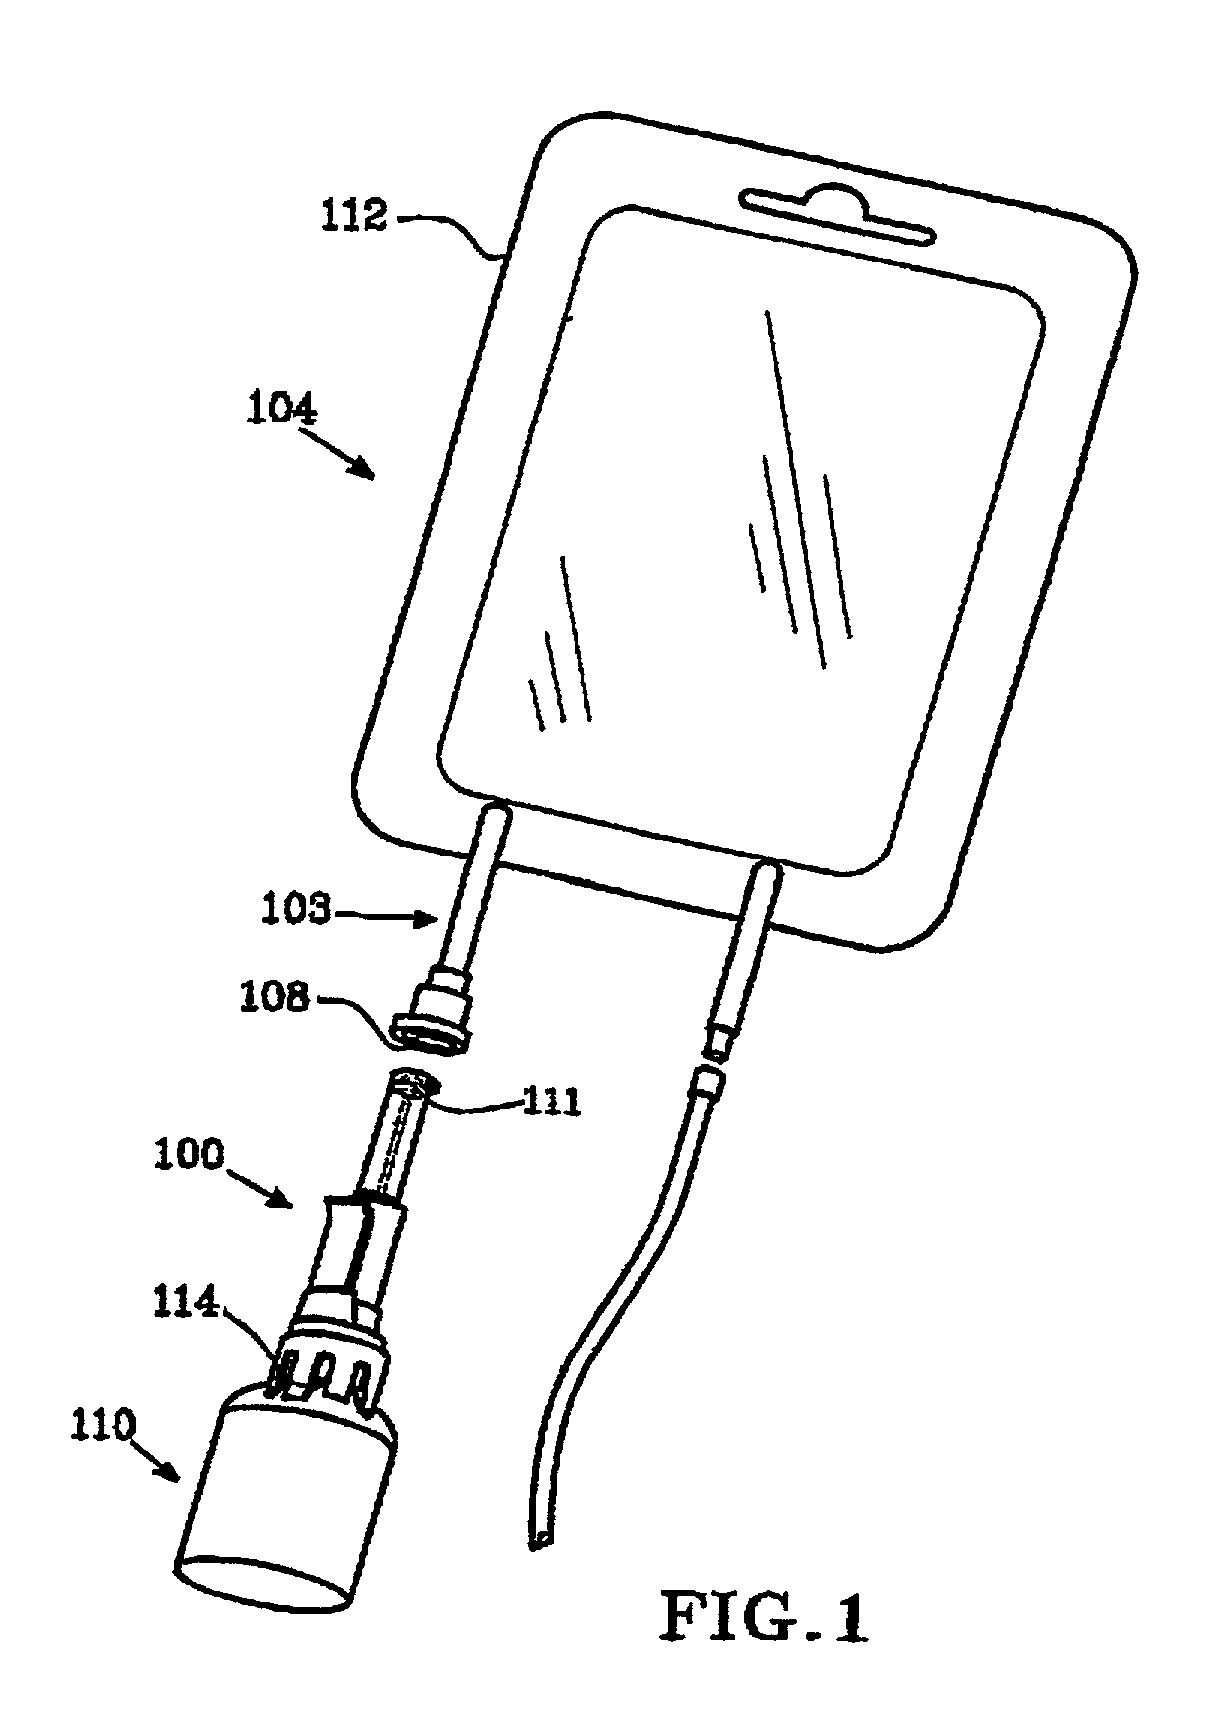 Method and device for fluid transfer in an infusion system